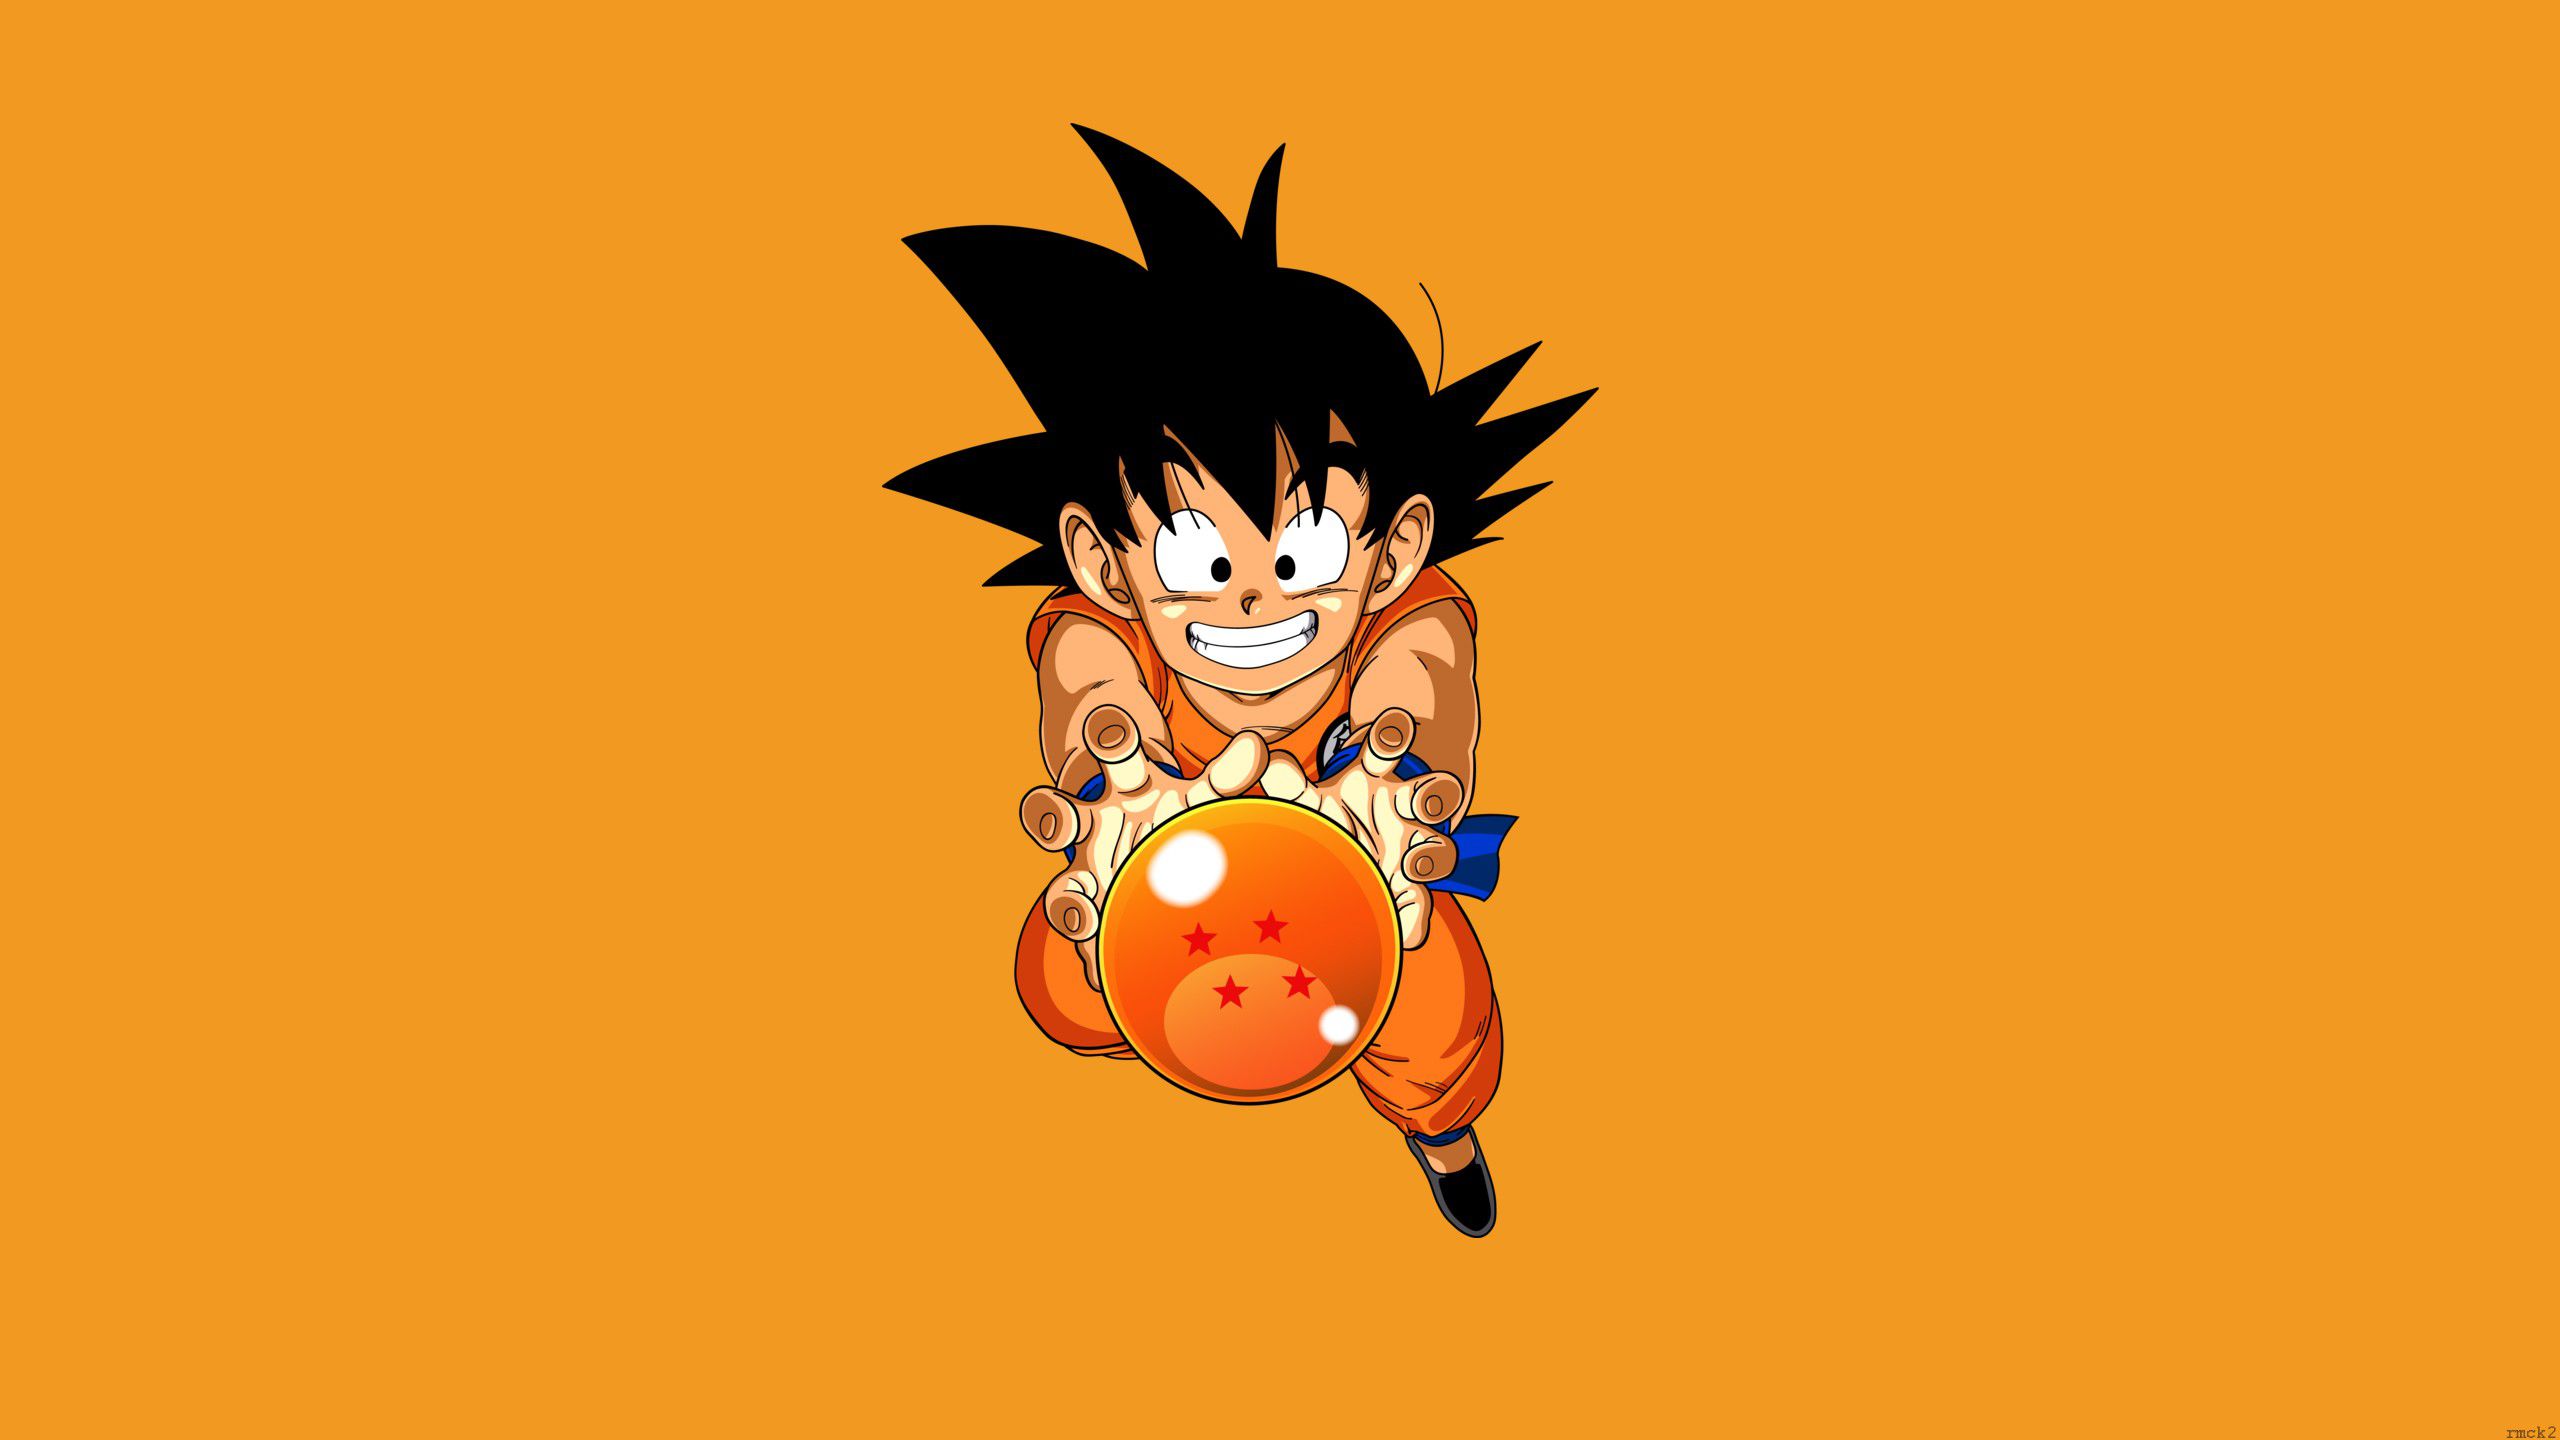 Dragon ball super hd wallpapers, hd images, backgrounds